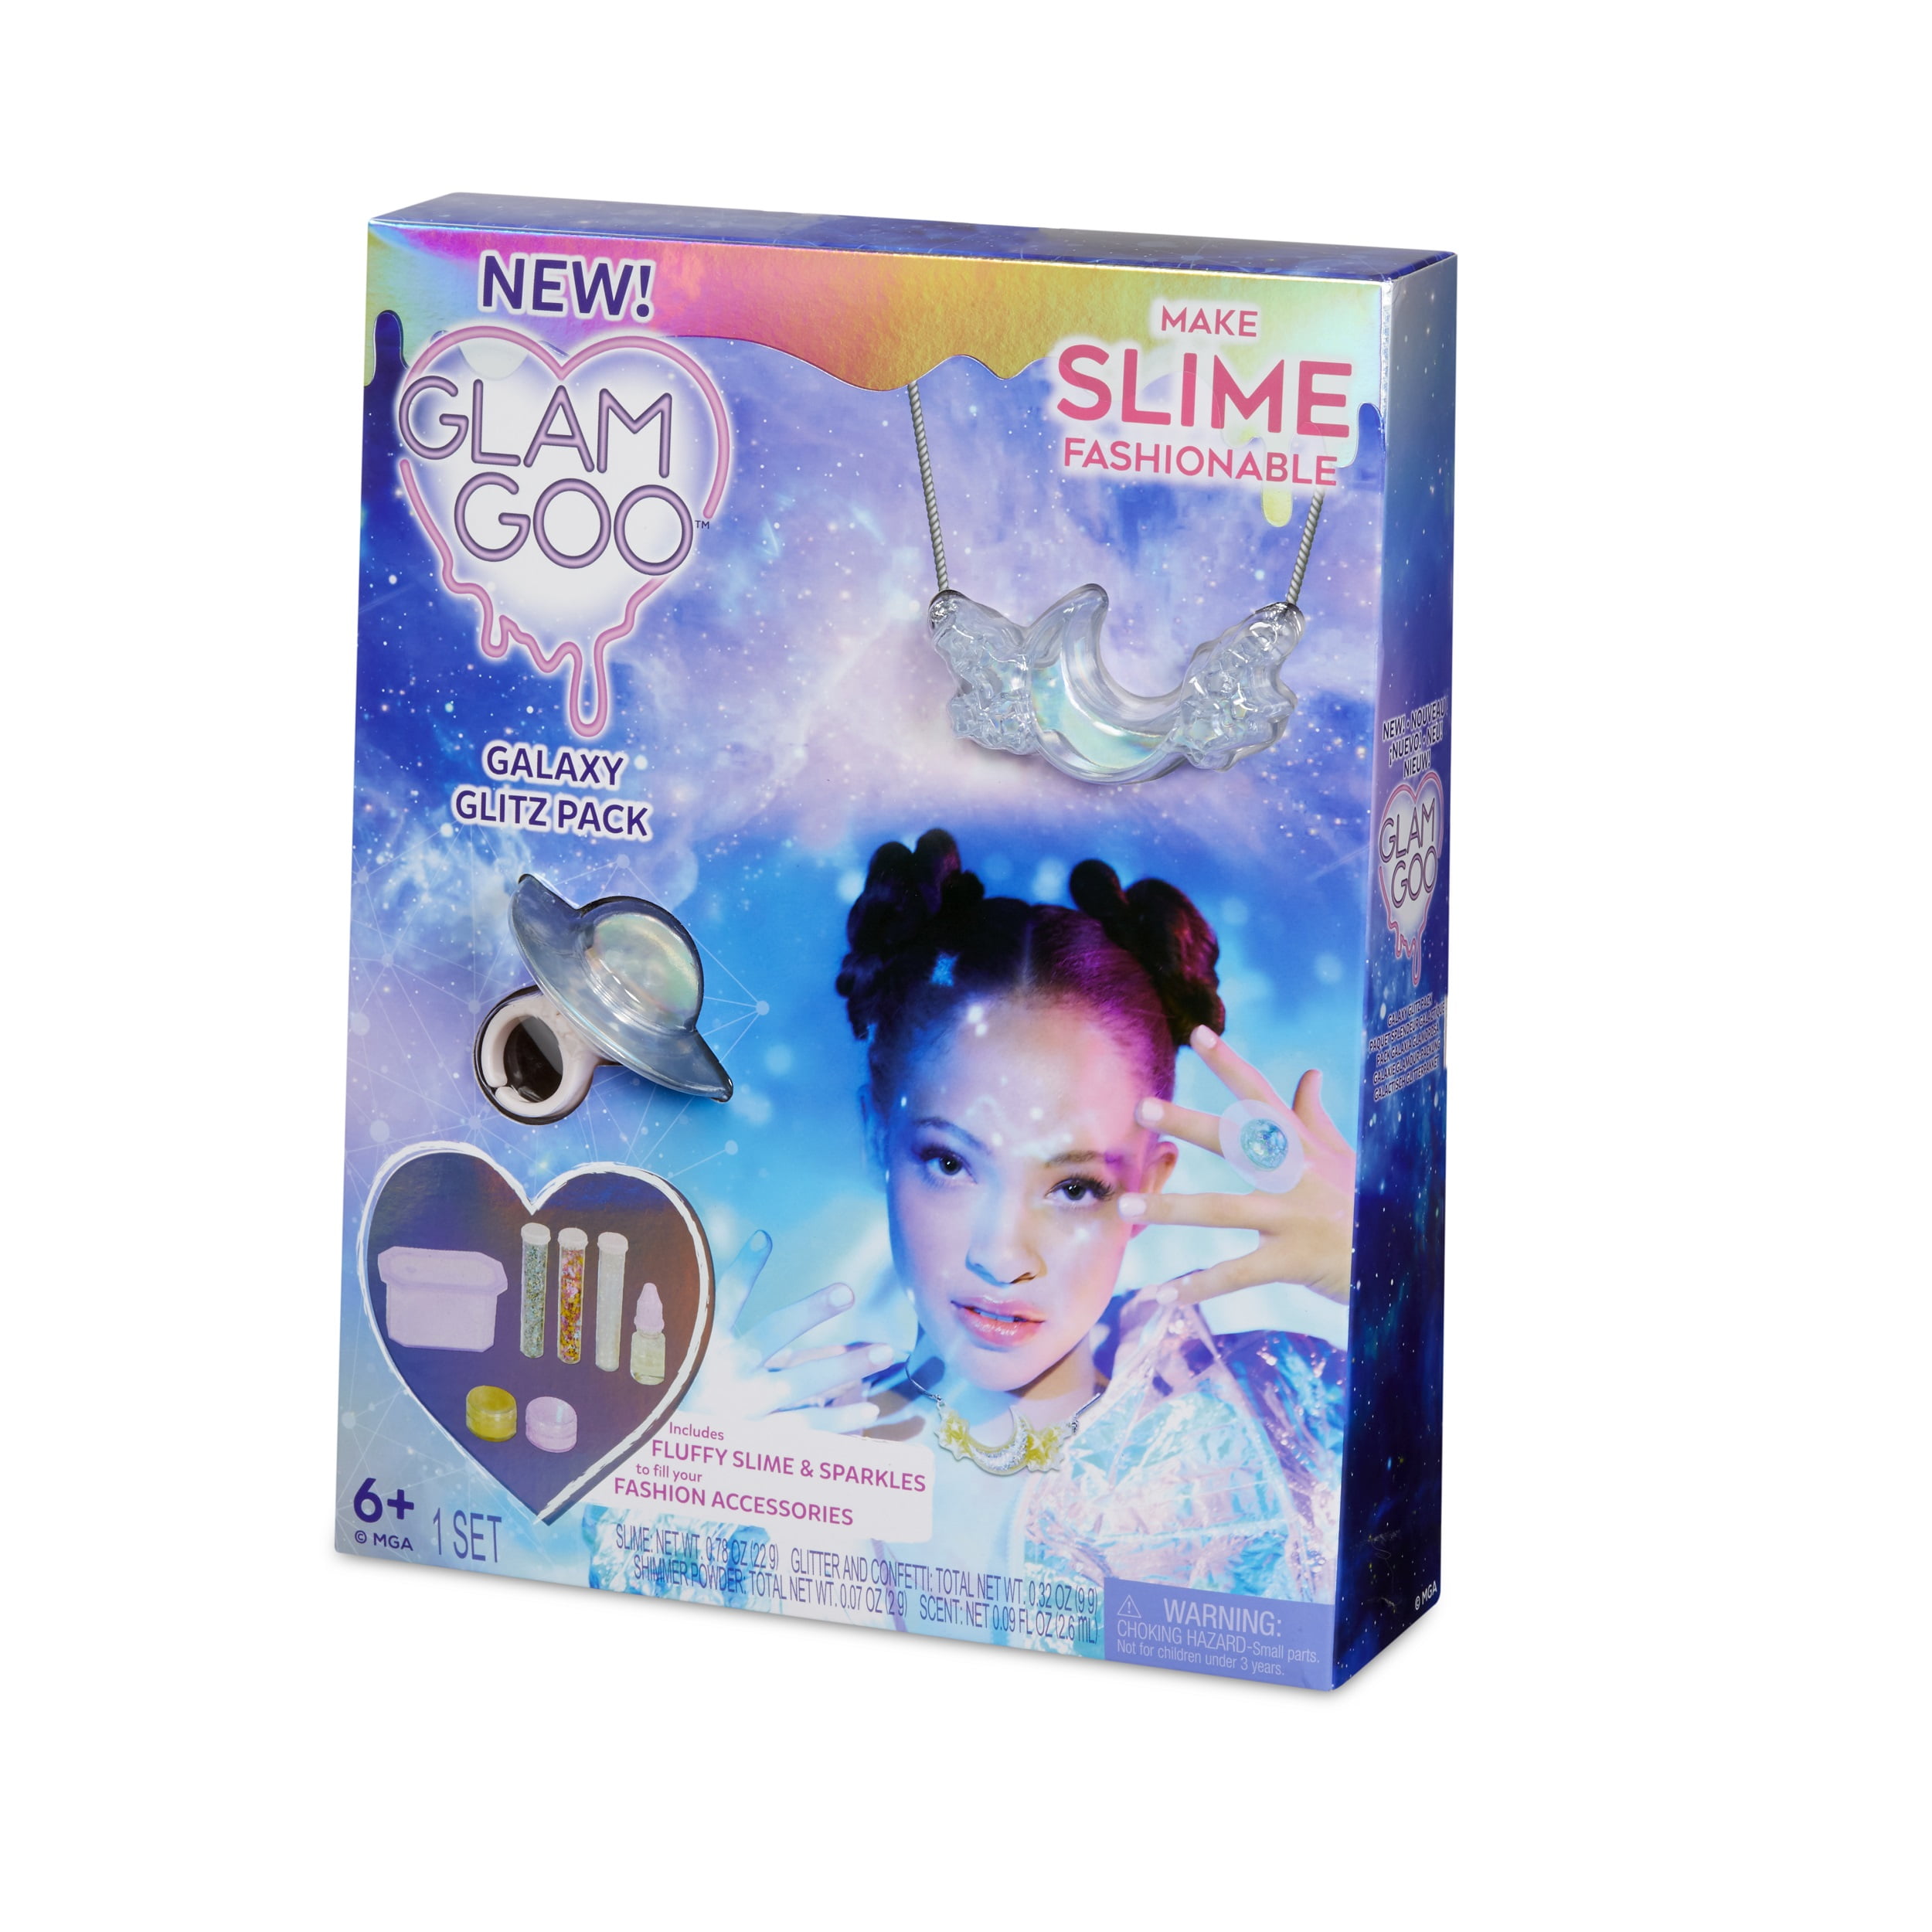 NEW GLAM GOO DELUXE SLIME PACK SPARKLE PURSE & JEWELRY MAKING KIT AGE 3+ 